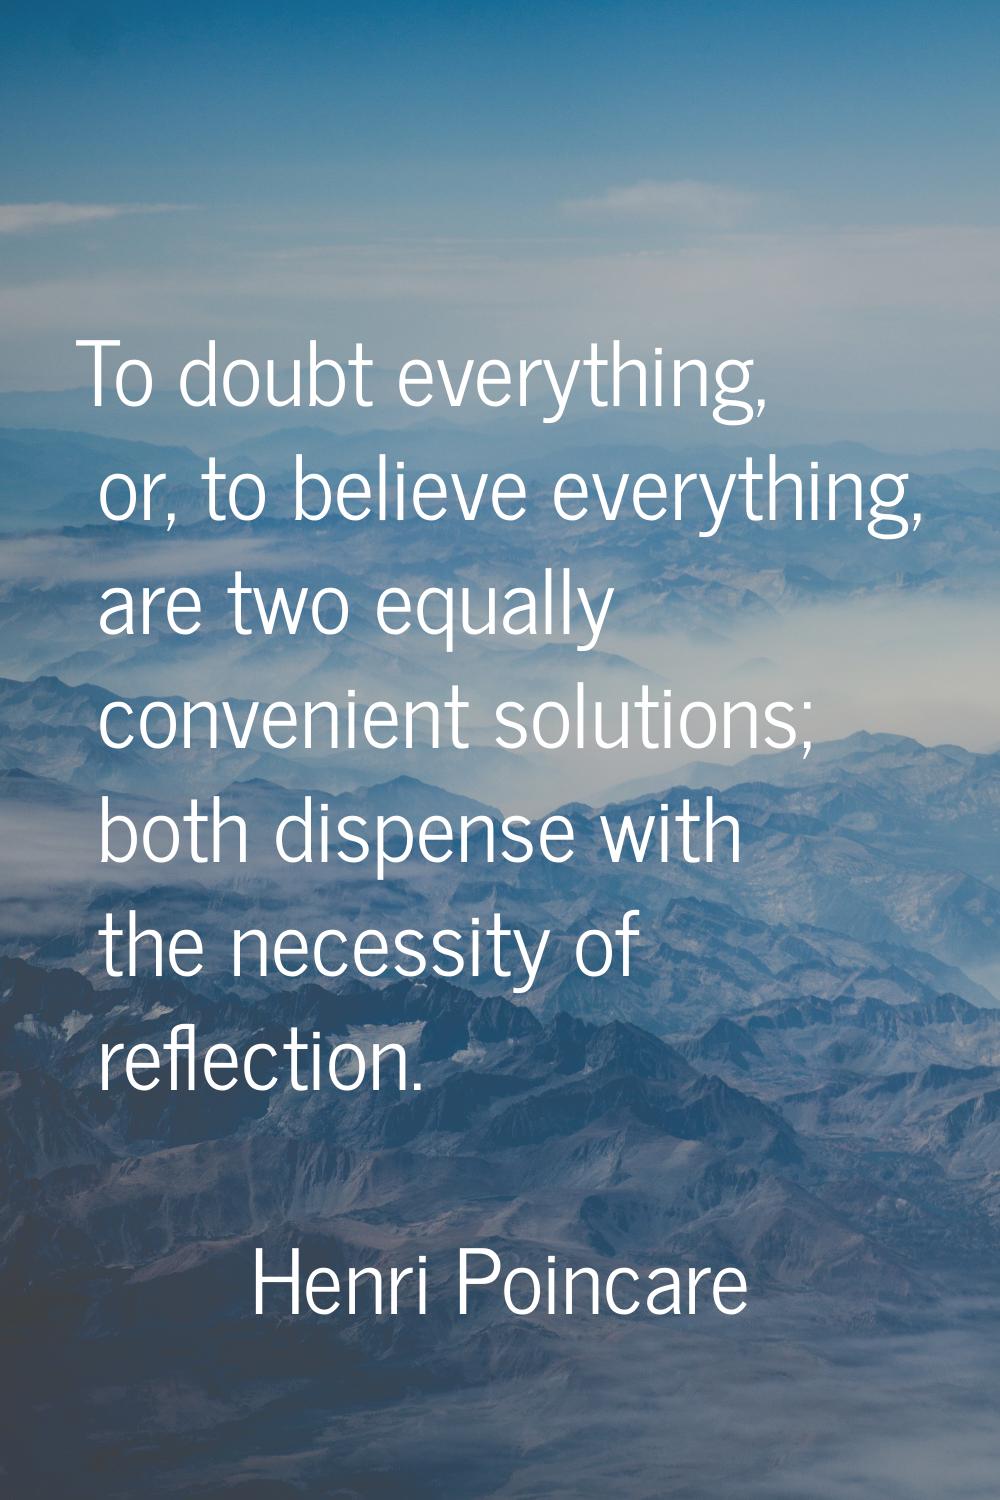 To doubt everything, or, to believe everything, are two equally convenient solutions; both dispense